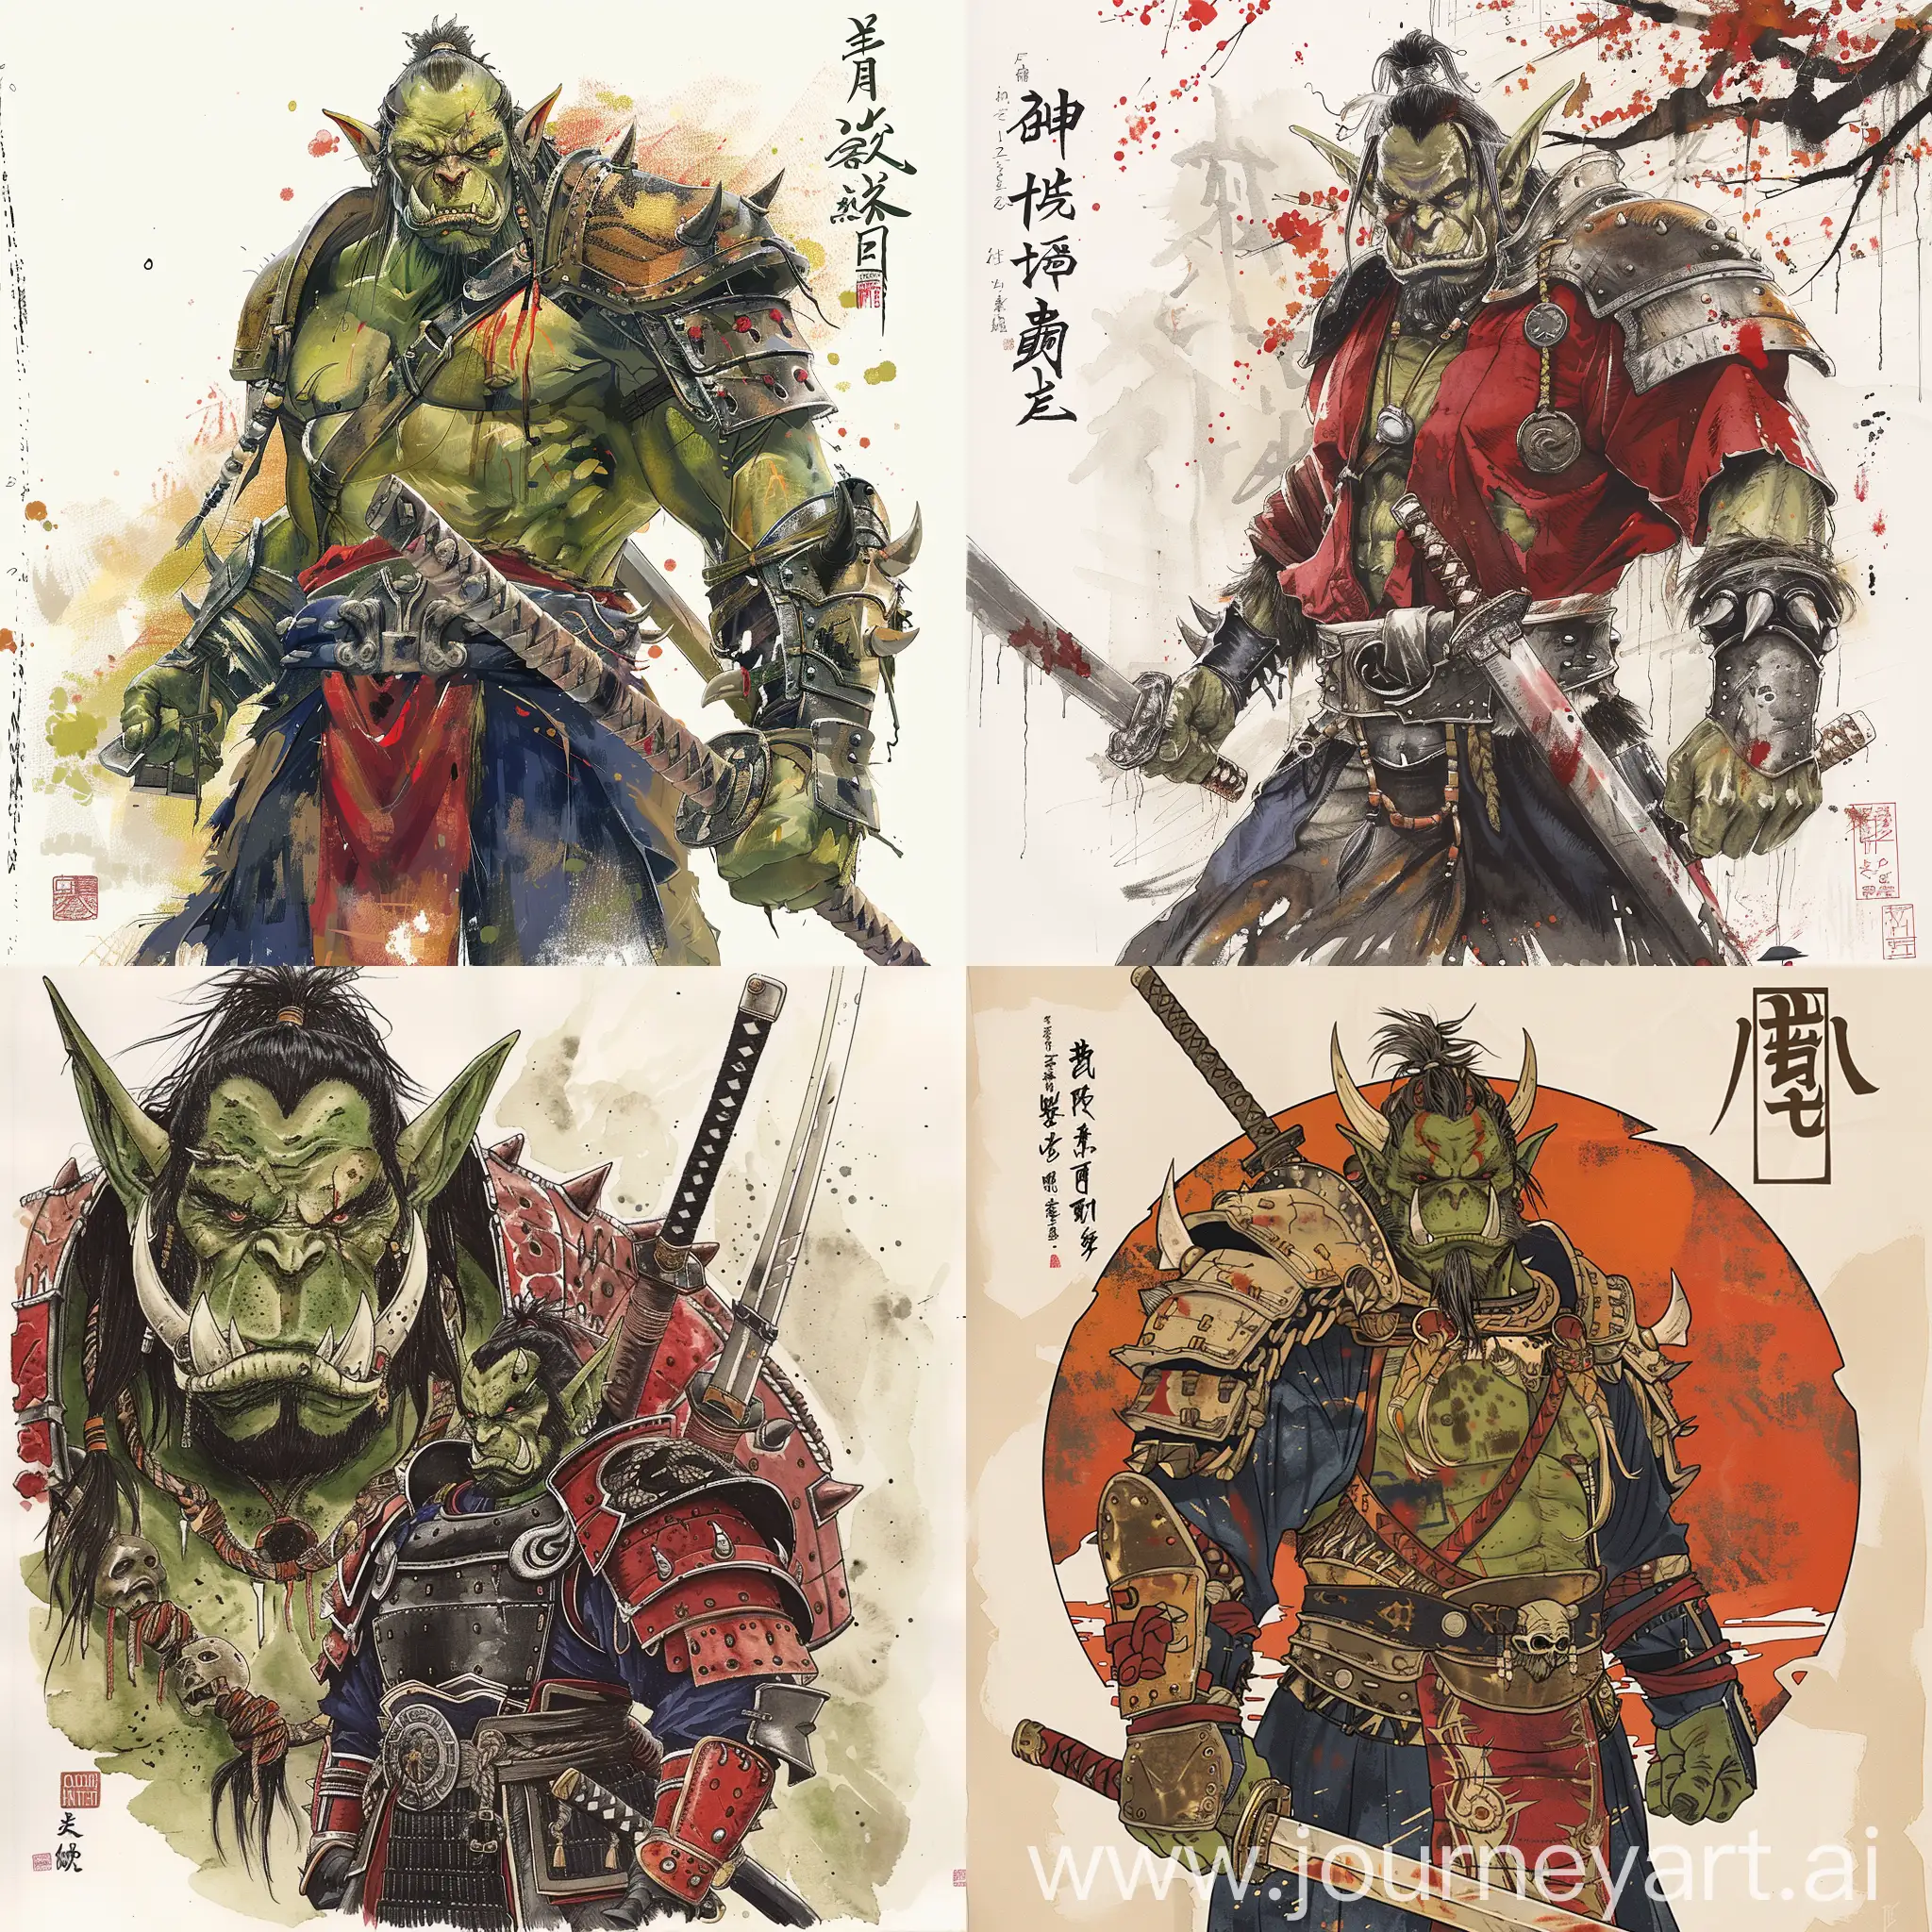 Draw me image in like style Yamato-e, draw me samurai blademaster orc from universe World of Warcraft